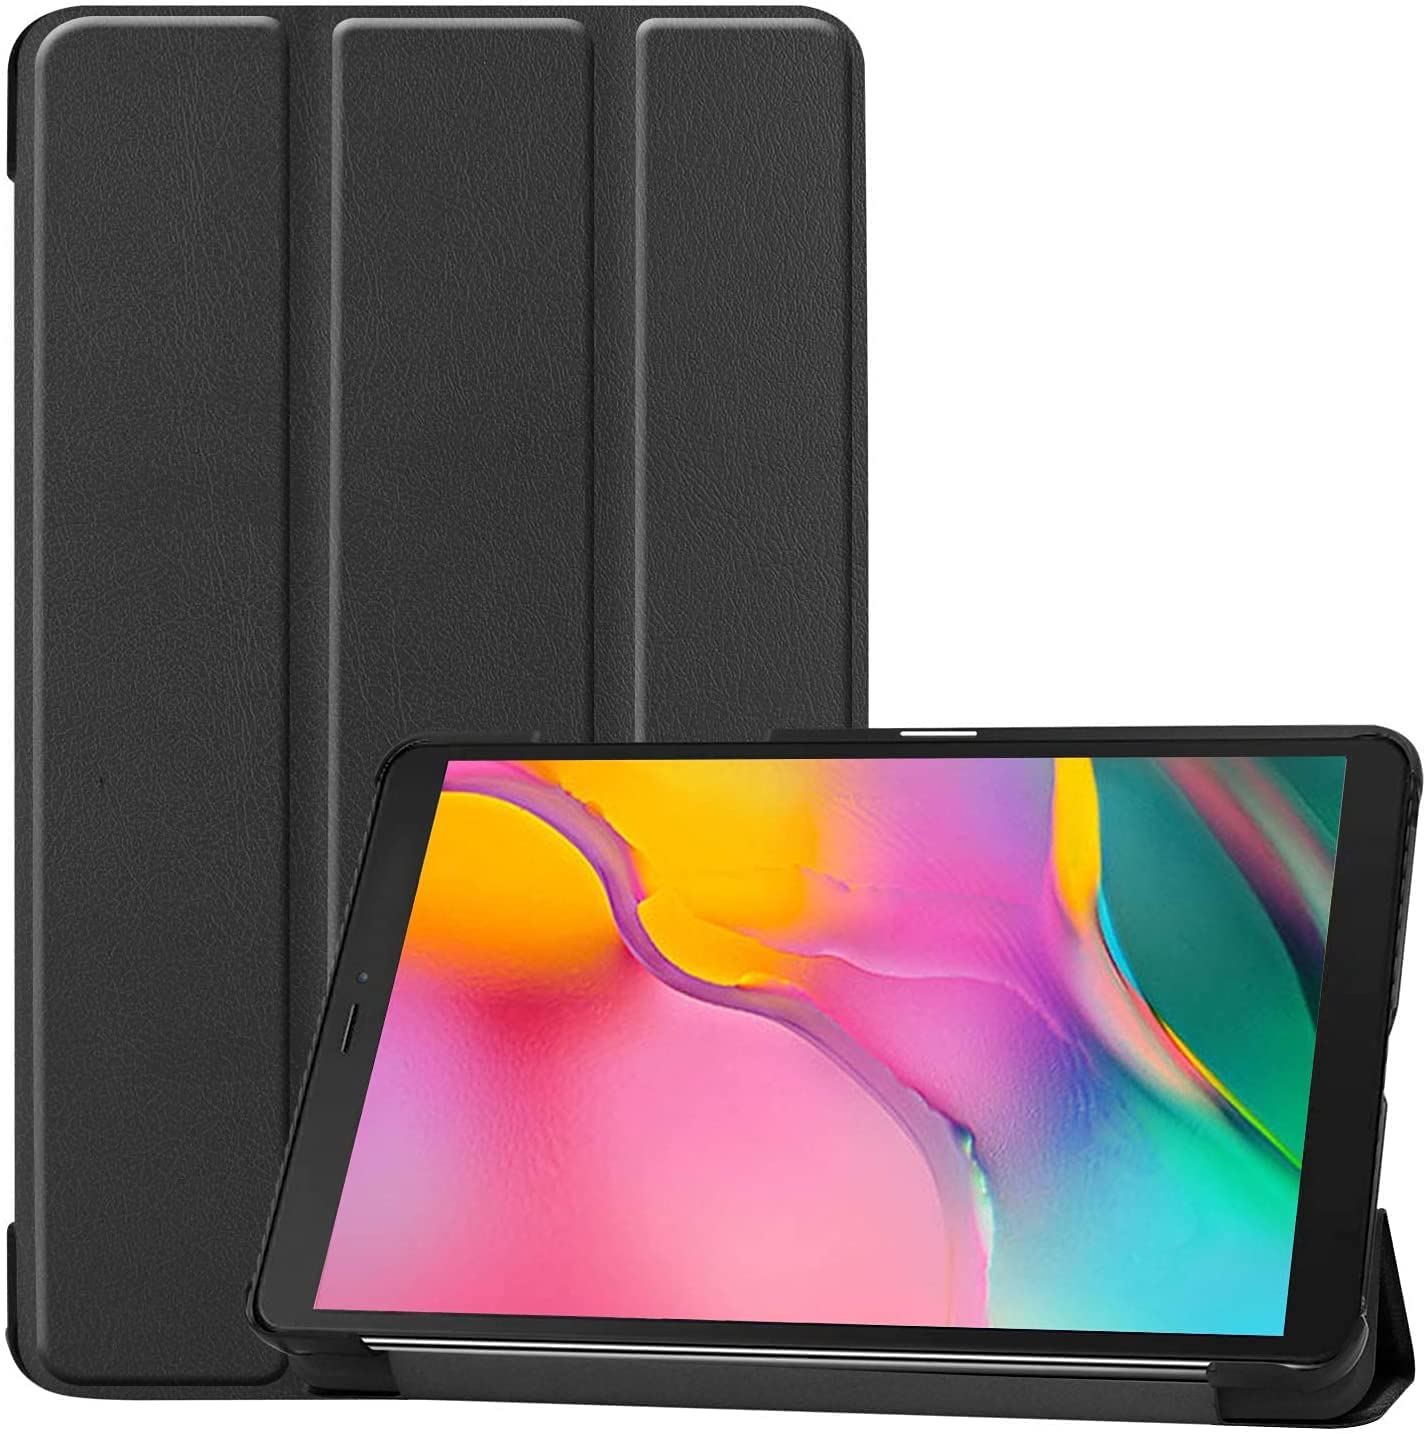 Samsung Galaxy Tab A 8.0-inch (2019 Version Newest) 32GB Touchscreen Tablet Bundle, Quad-Core Qualcomm Snapdragon Processor, 2GB RAM, Android 9.0 OS (LTE Unlocked, Black) with Mazepoly Accessories - image 4 of 7